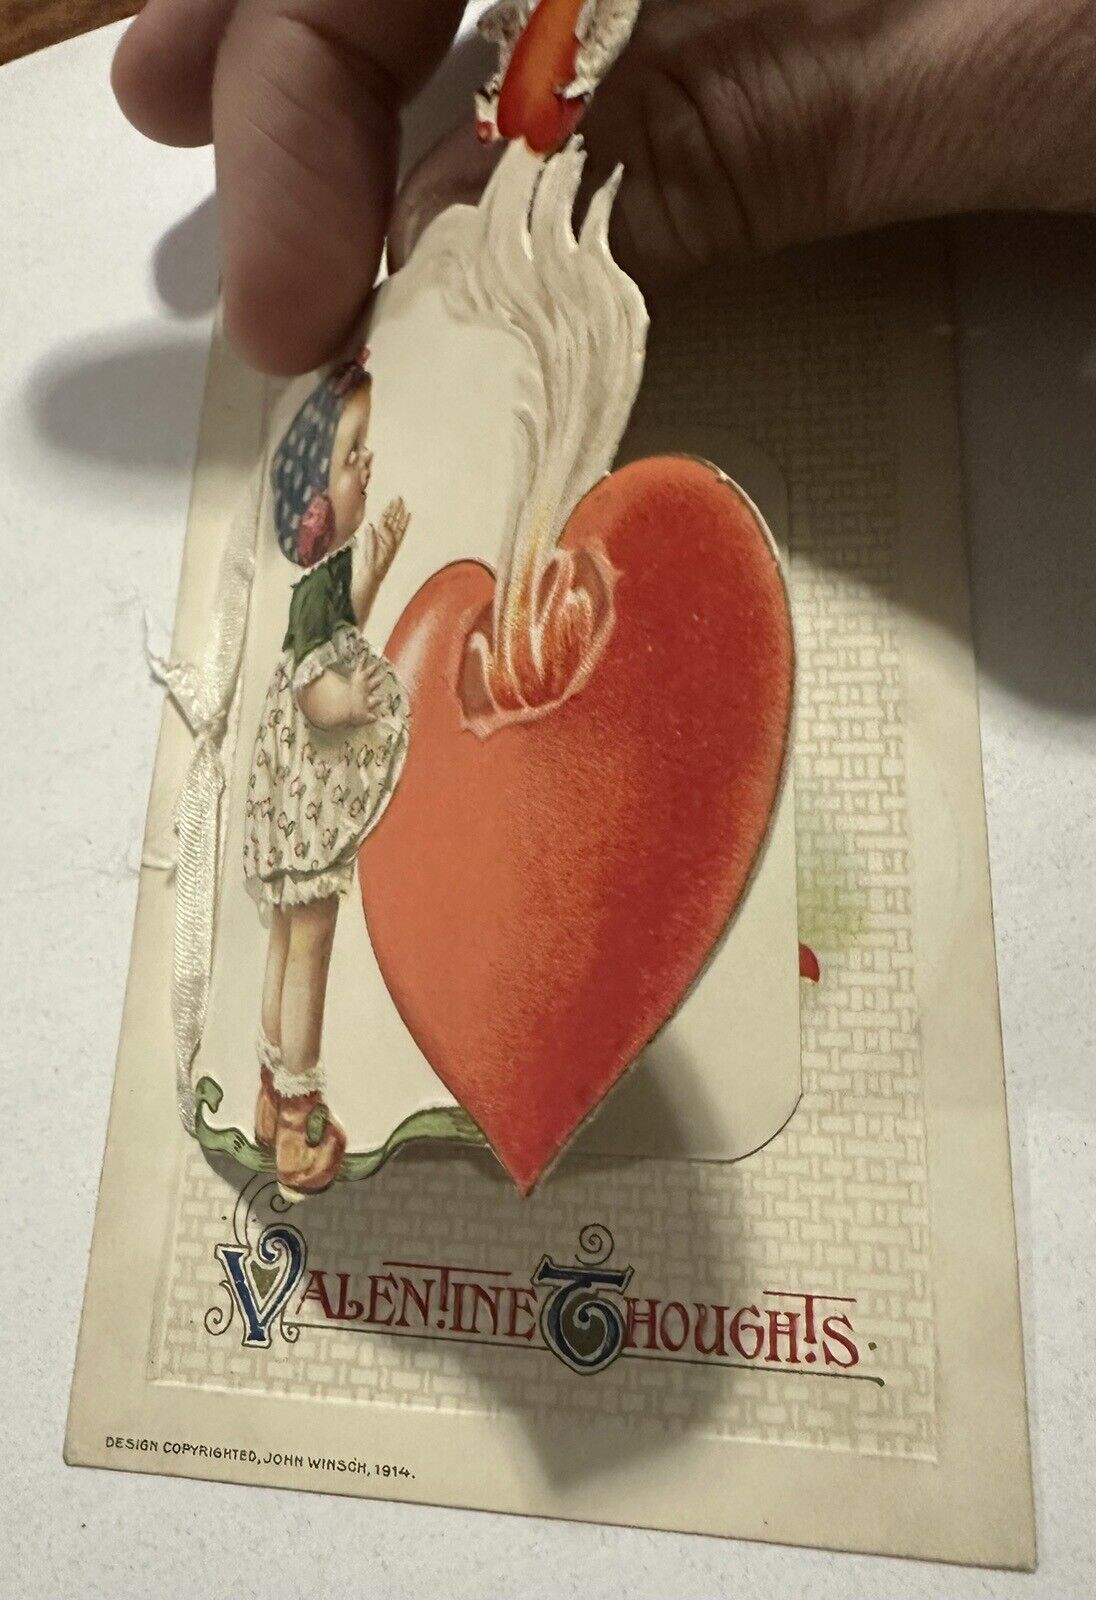 1914 John Winsch Embossed Valentine Thoughts Postcard Mechanical Paint Very RARE